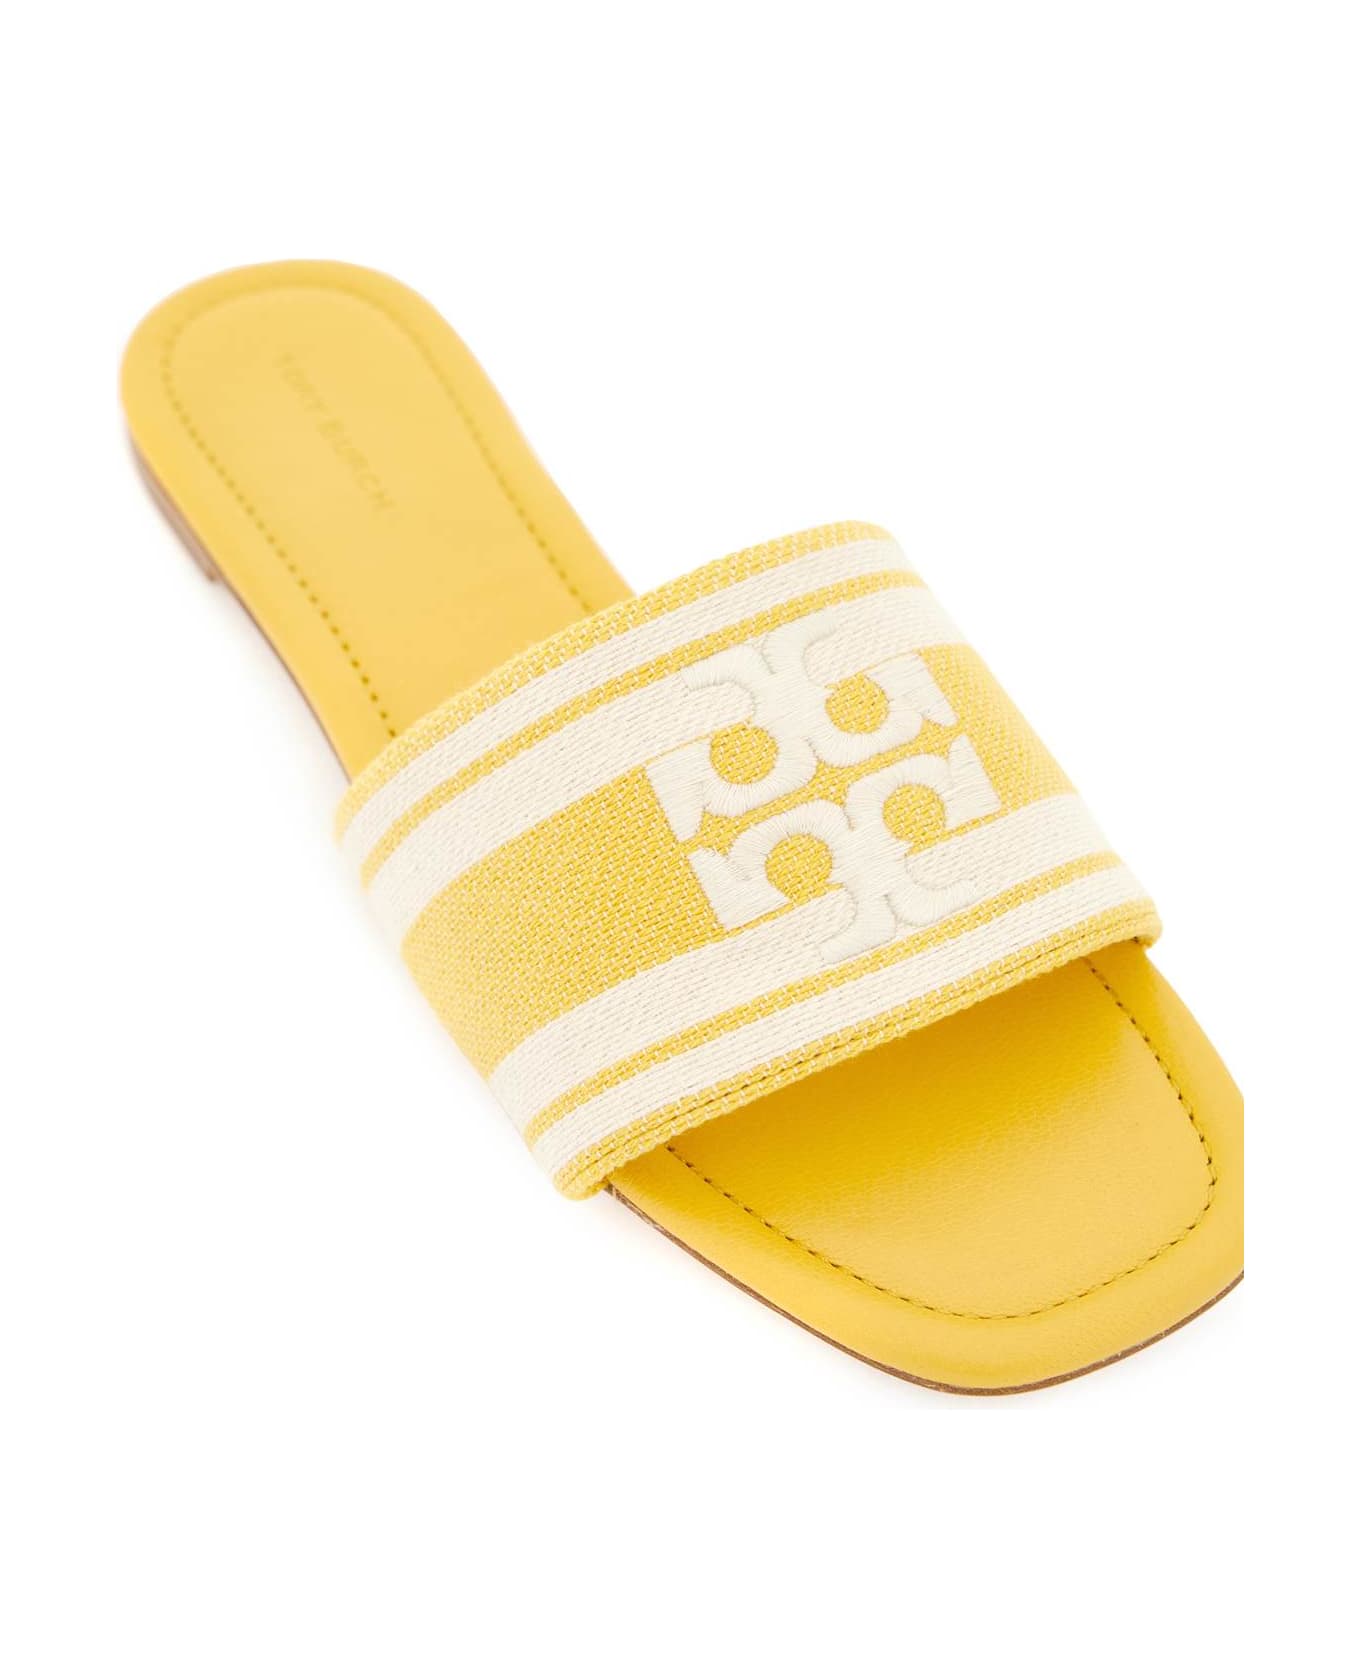 Tory Burch Slides With Embroidered Band - MELLOW YELLOW ASH WHITE (Yellow)